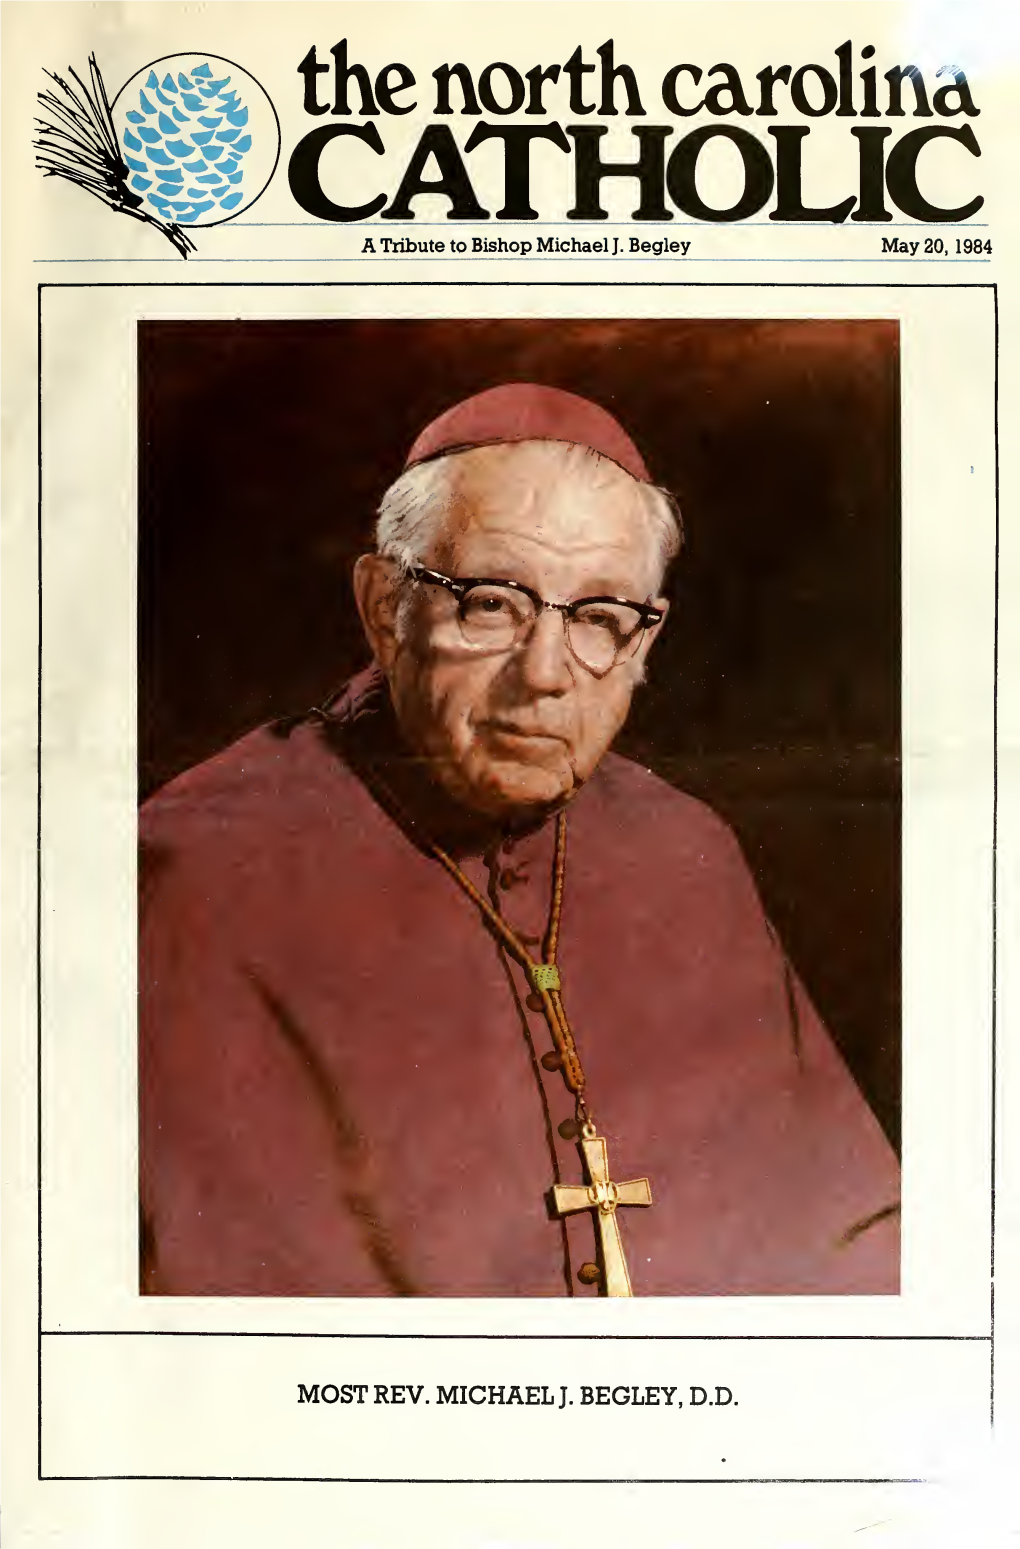 A Tribute to Bishop Michael J. Begley May 20, 1984